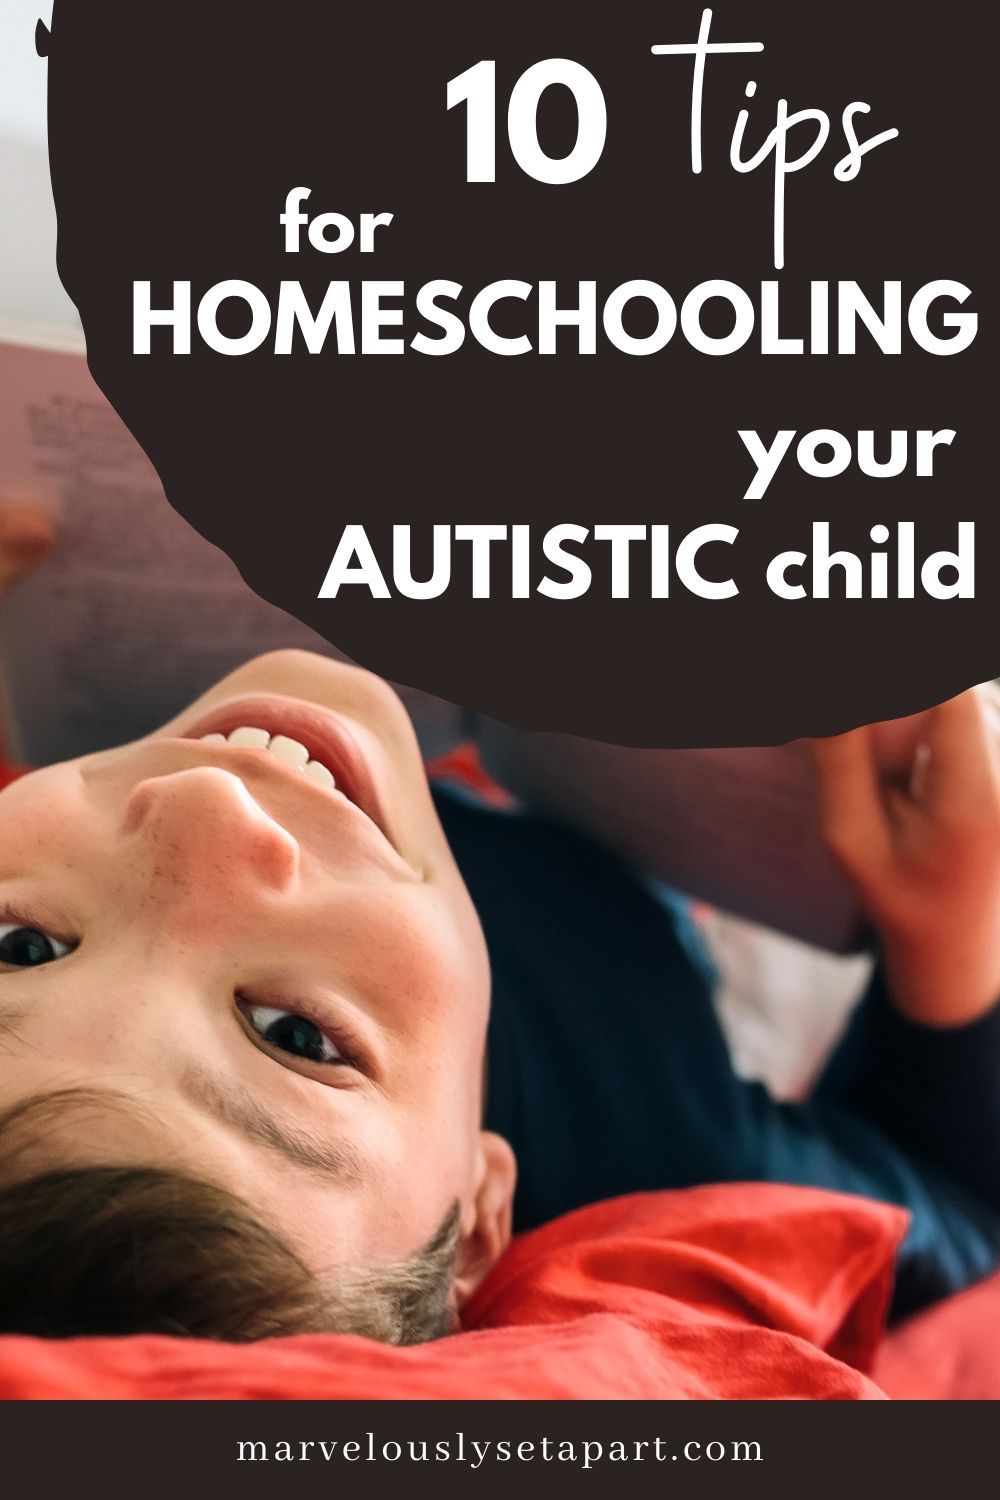 10 Tips on Homeschooling Your Autistic Child